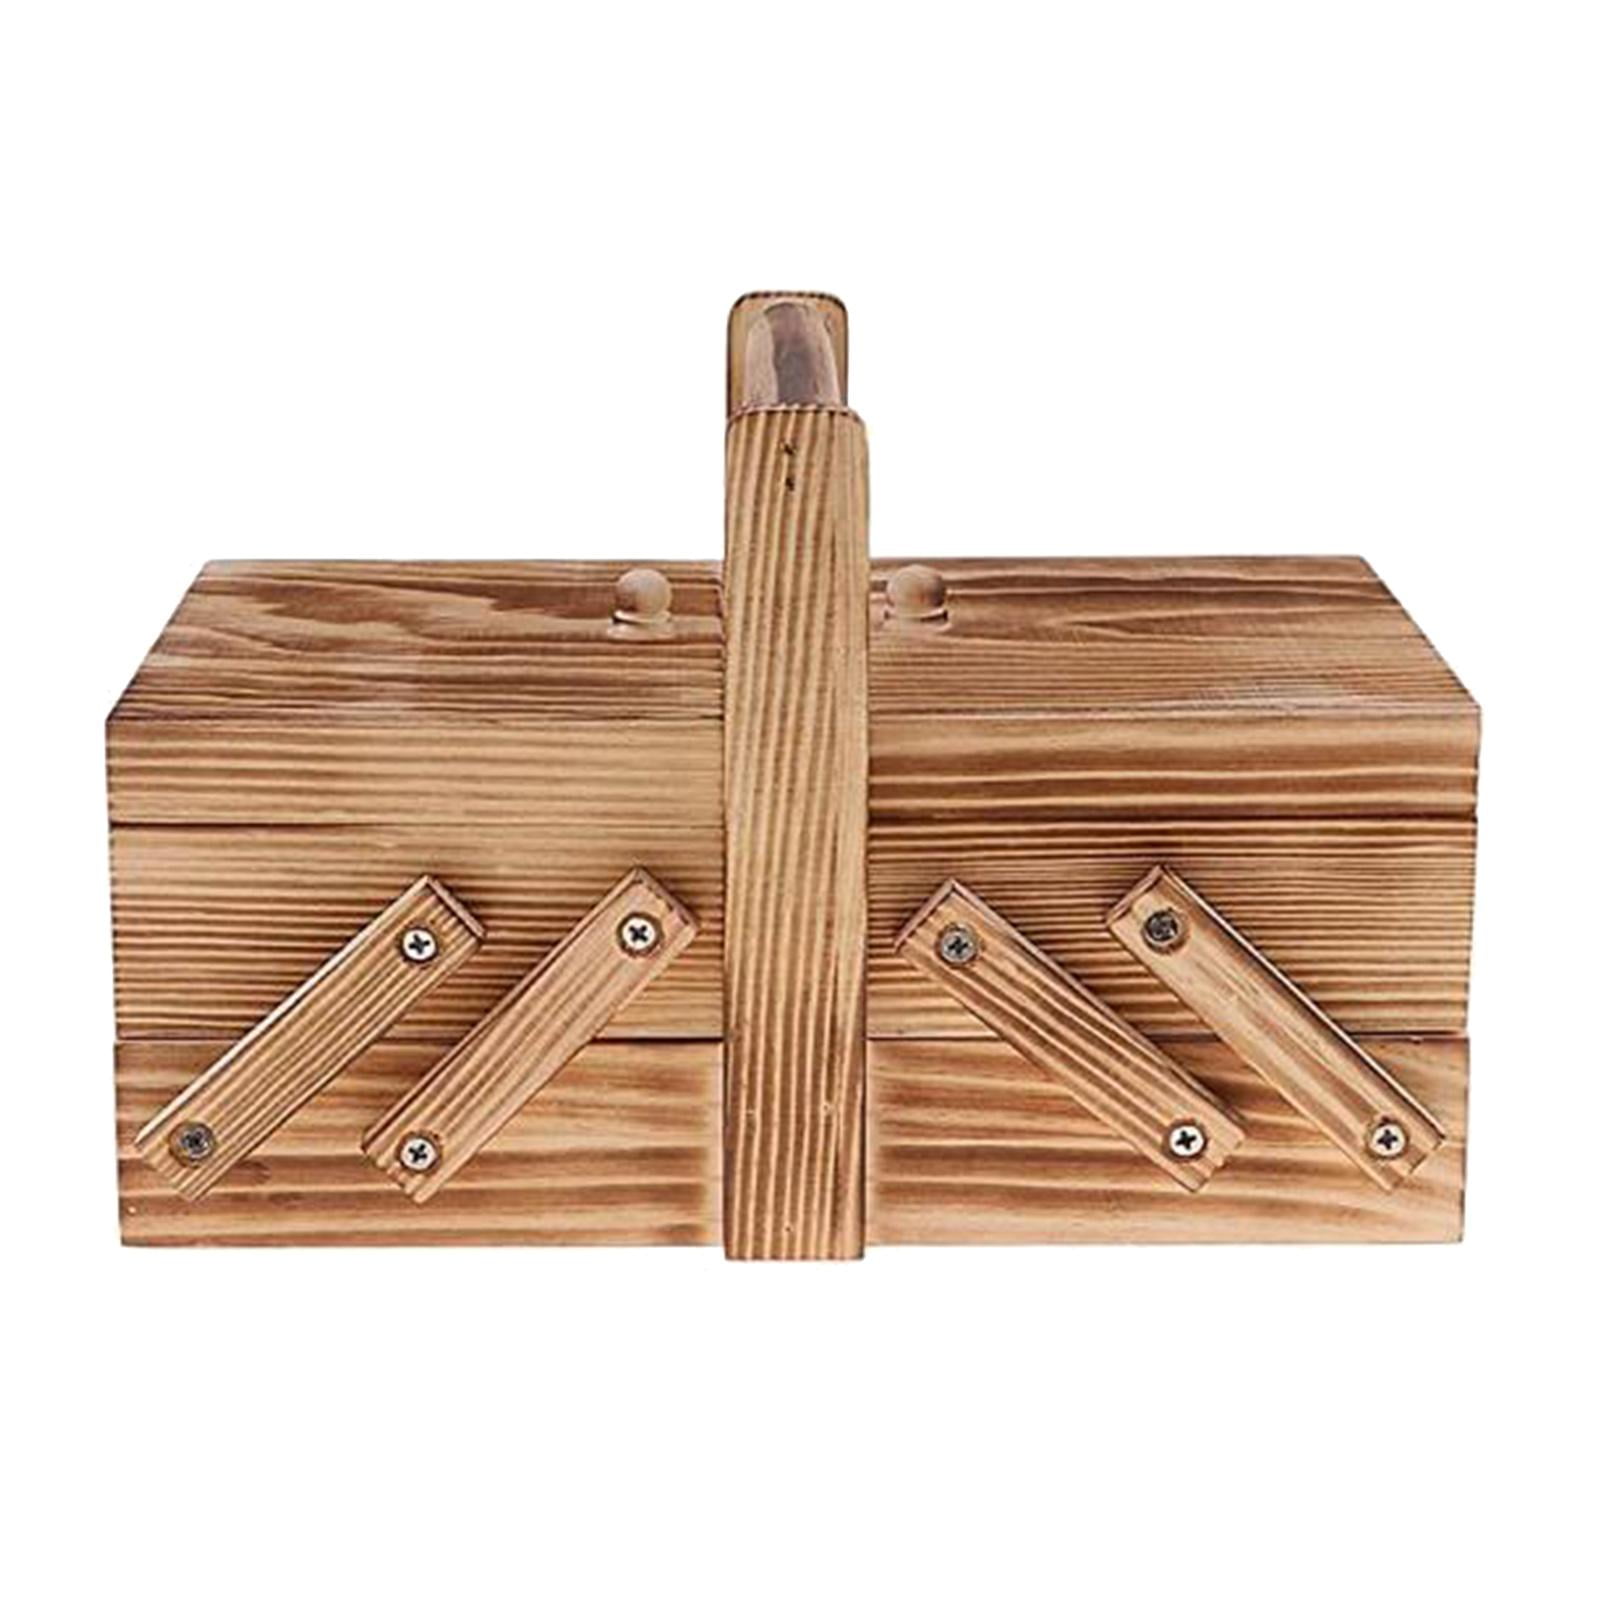 Shop for SAXTX Large Sewing Basket with 99Pcs Sewing Kit Accessories Wooden Sewing  Box Organizer with Multiple Compartments at Wholesale Price on